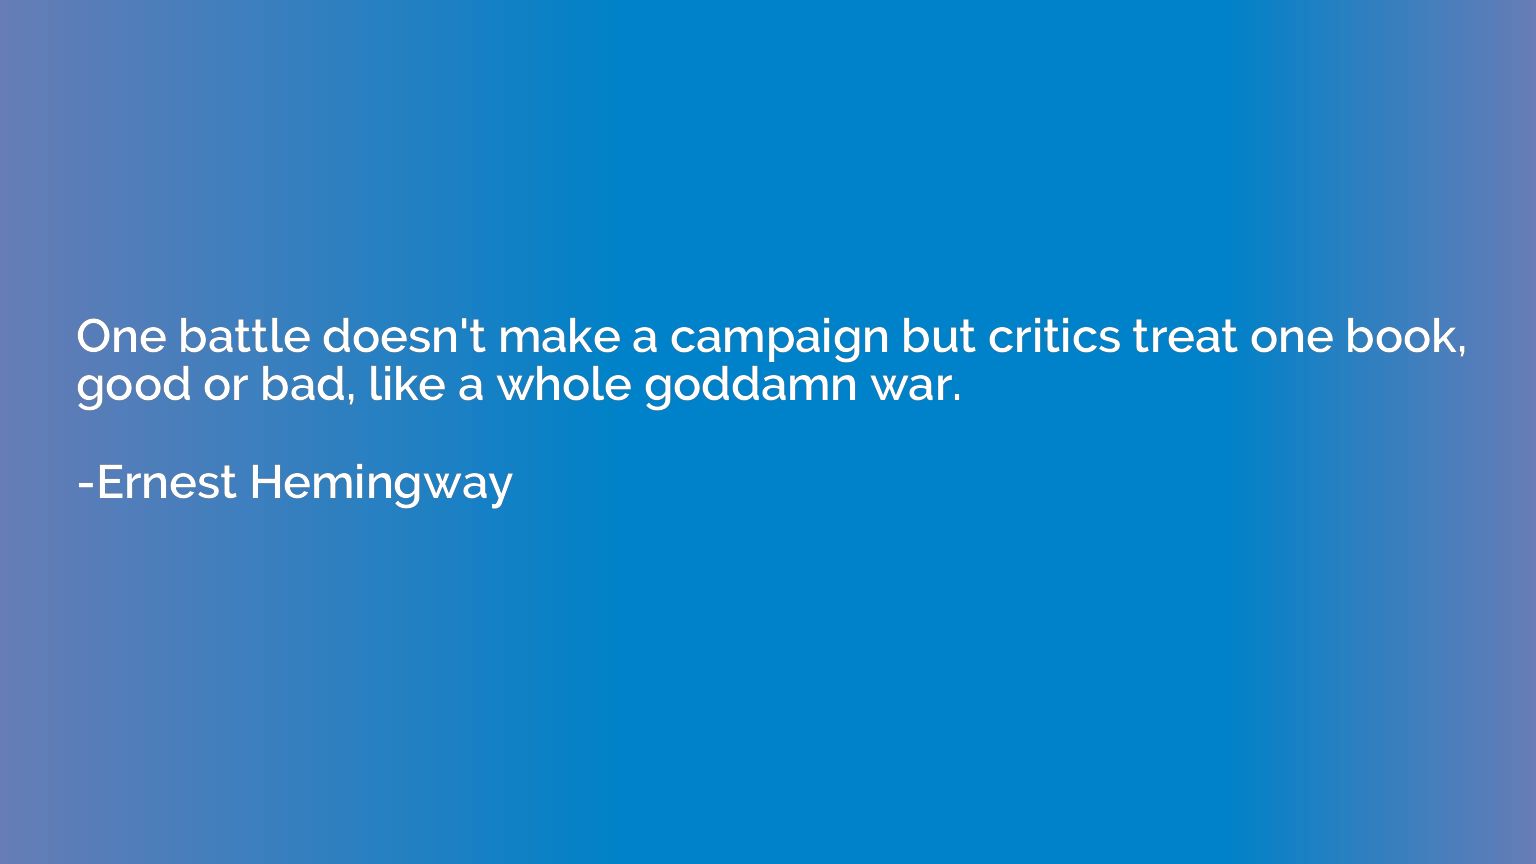 One battle doesn't make a campaign but critics treat one boo